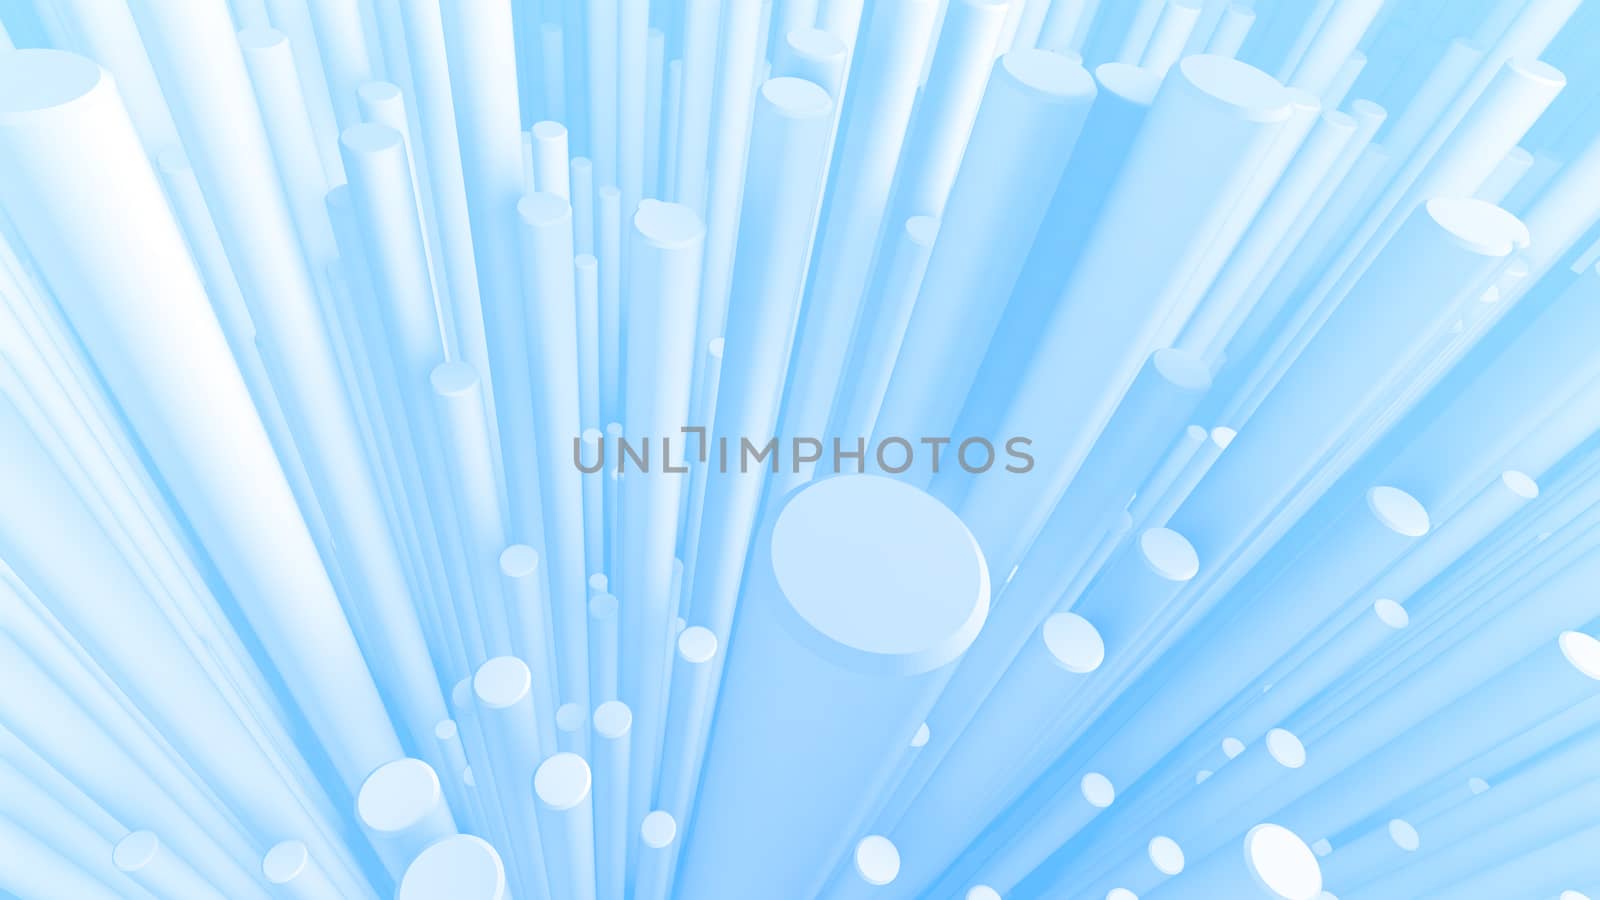 An opt art 3d illustration of abstract and tall white pillars sticking out from the light blue background. They form the mood of astonishment, artistic novelty and fun.